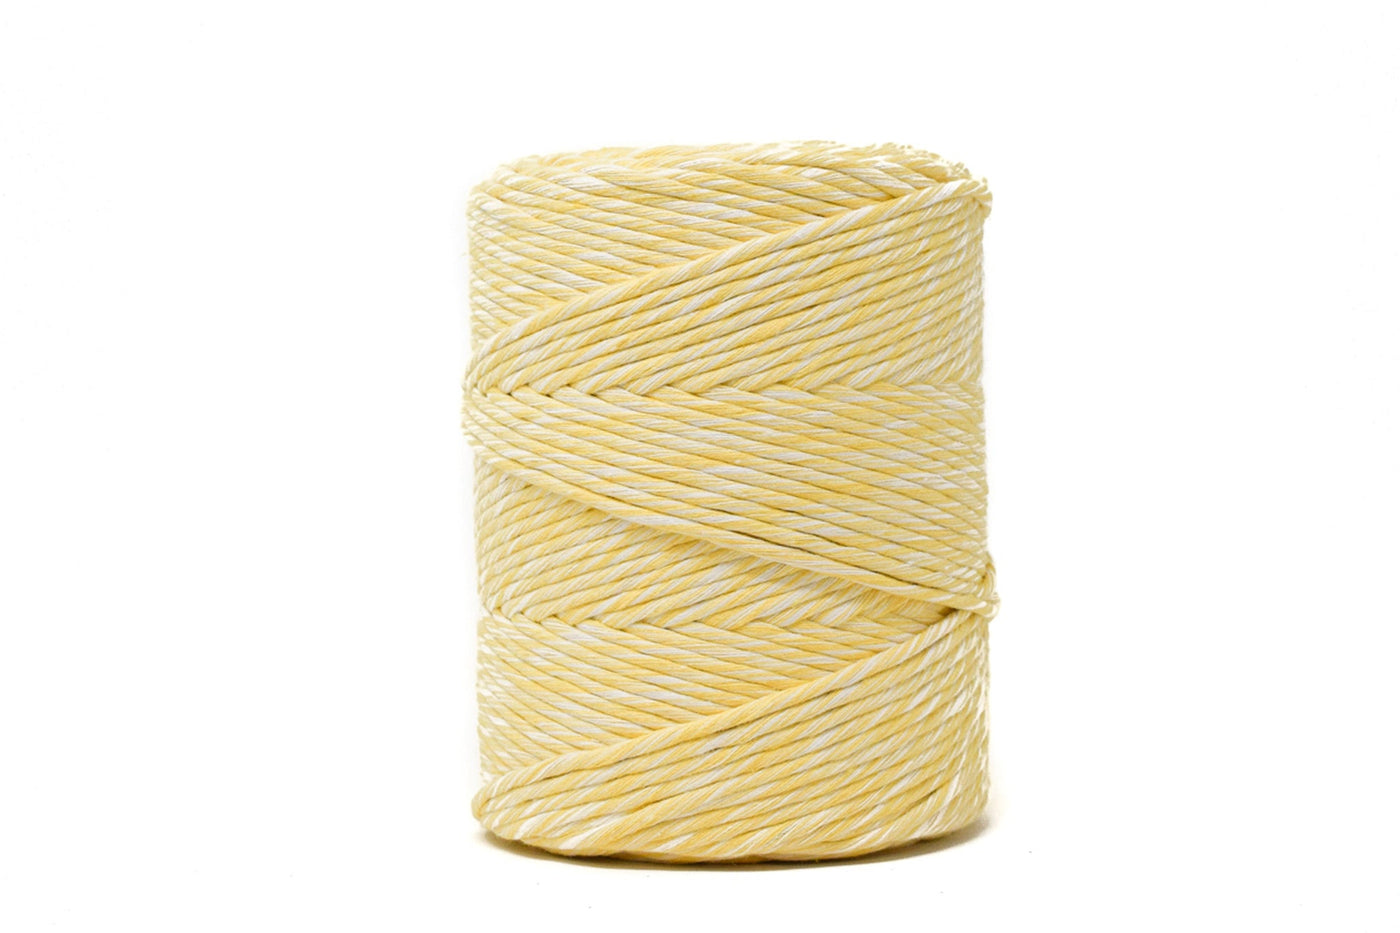 OUTLET SOFT COTTON CORD ZERO WASTE 4 MM - 1 SINGLE STRAND